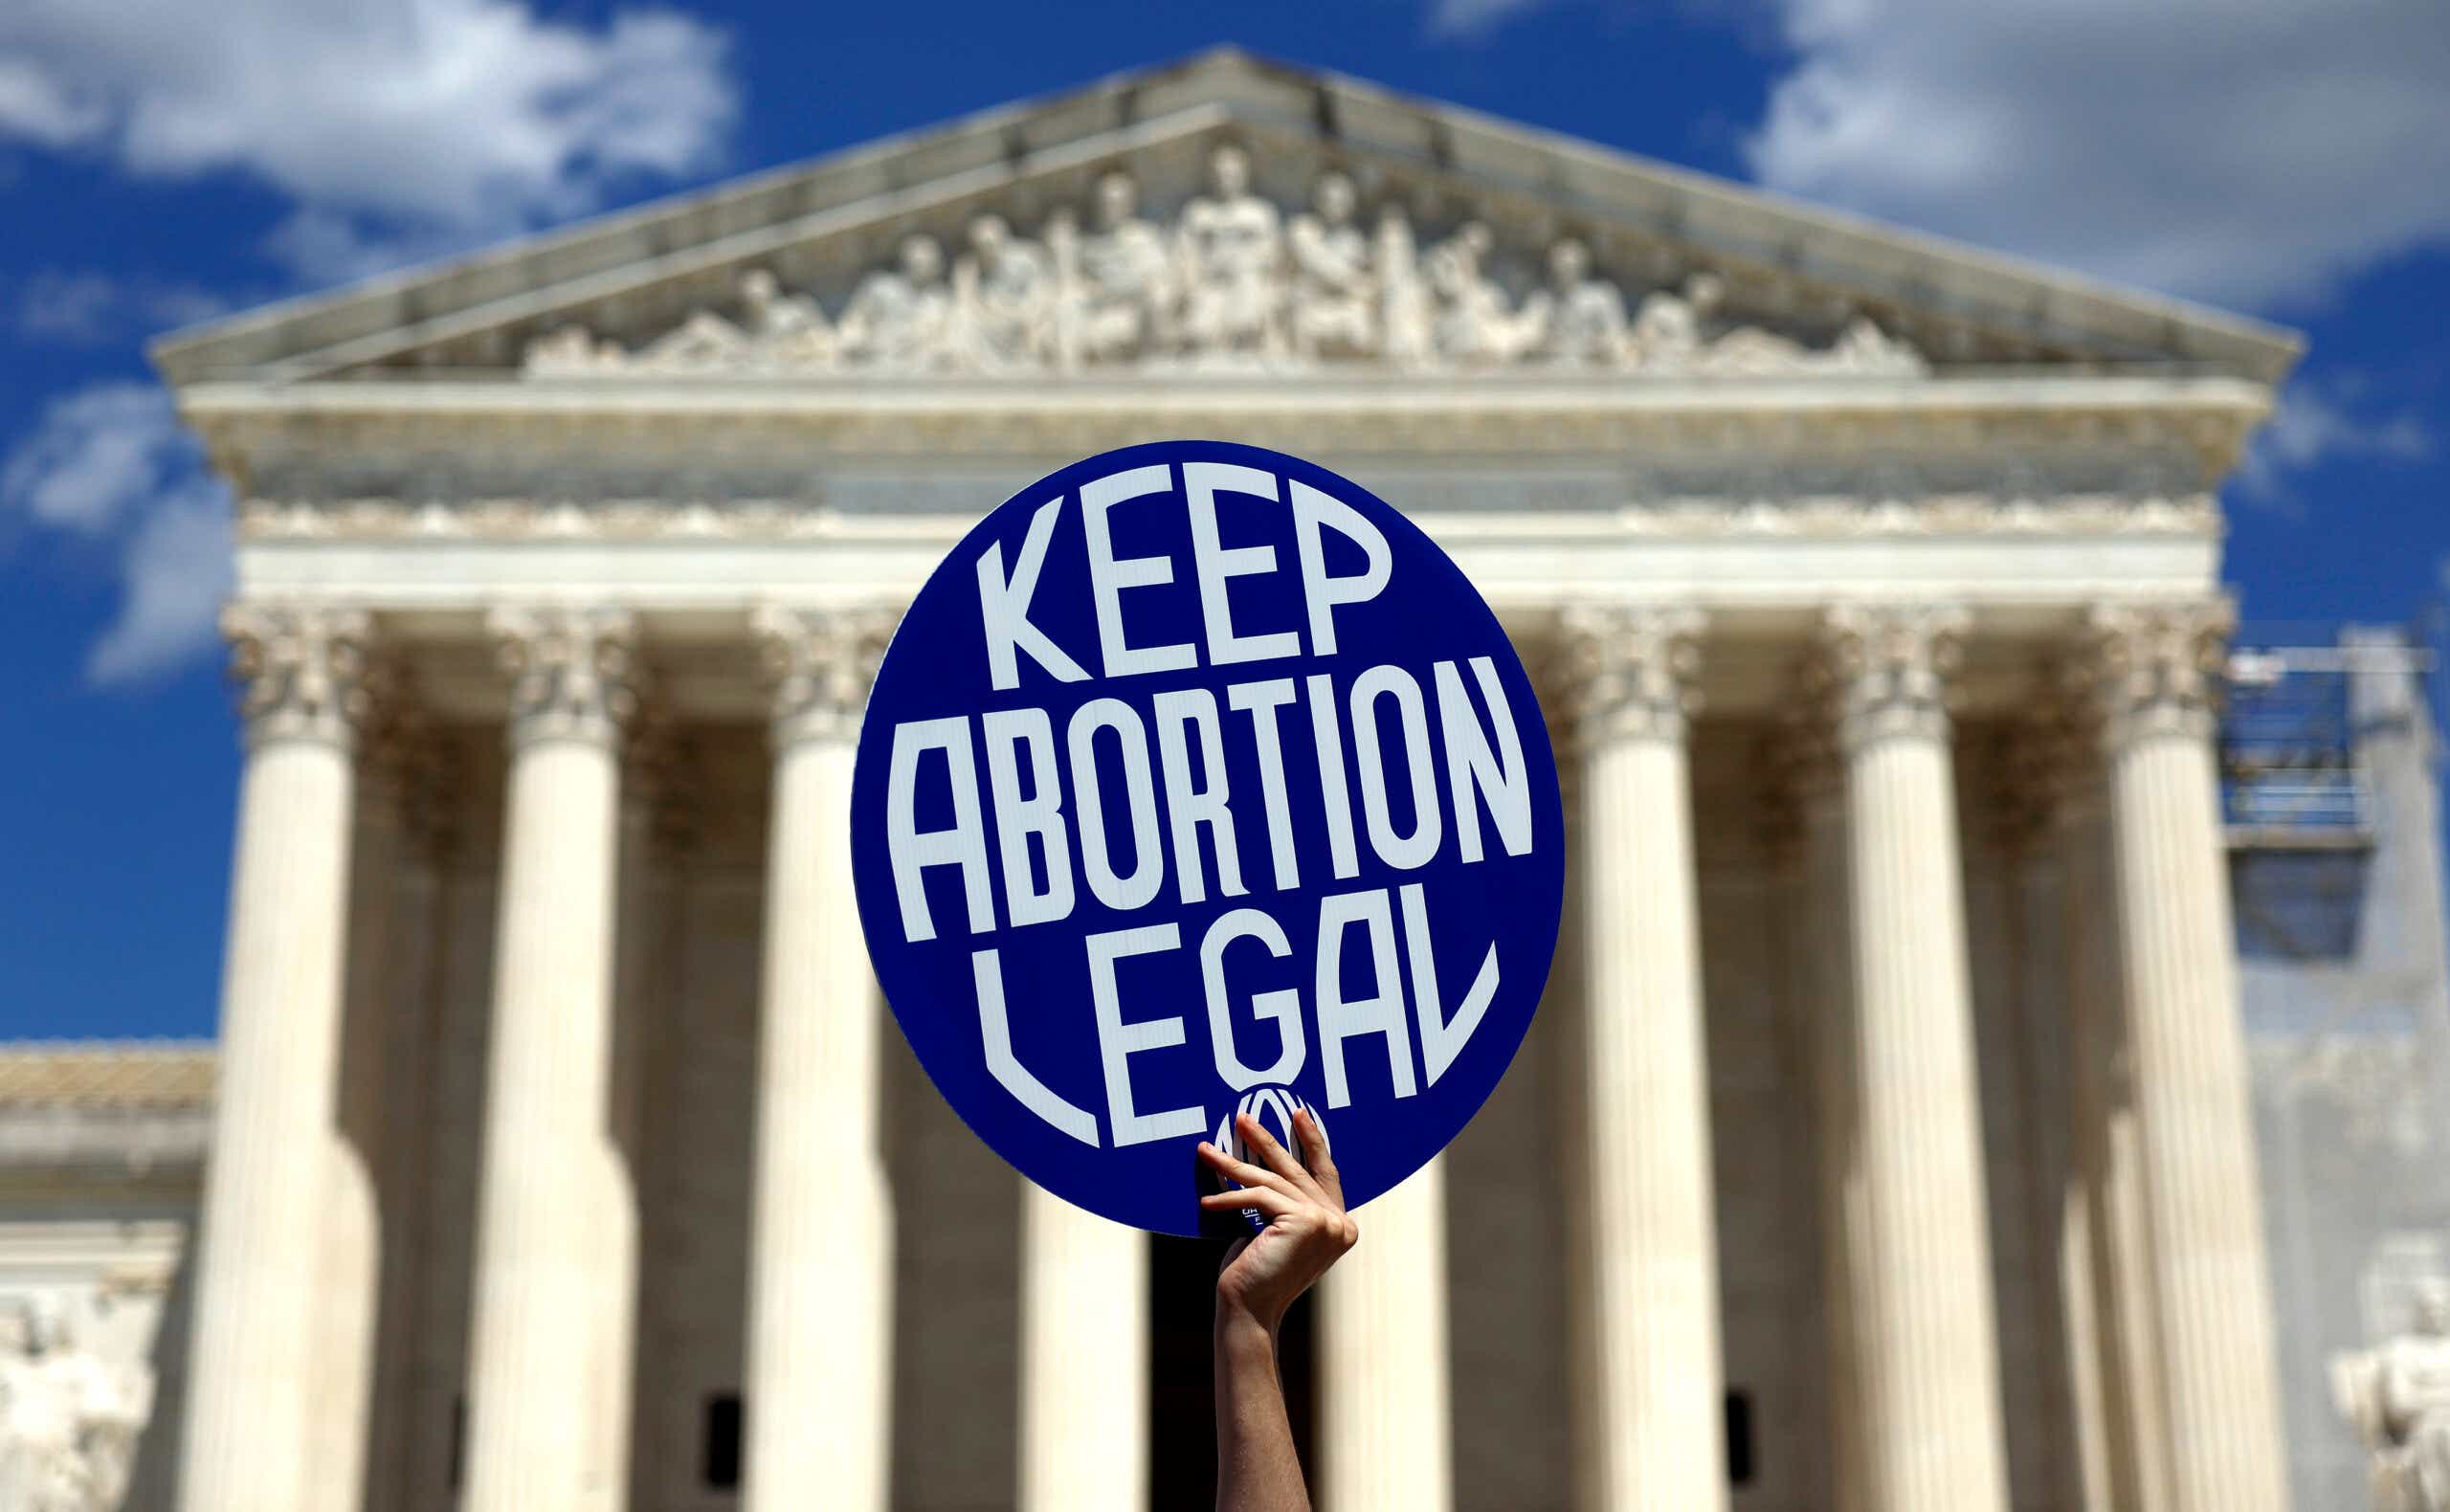 Hand holding sign saying "keep abortion legal" in front of the Supreme Court